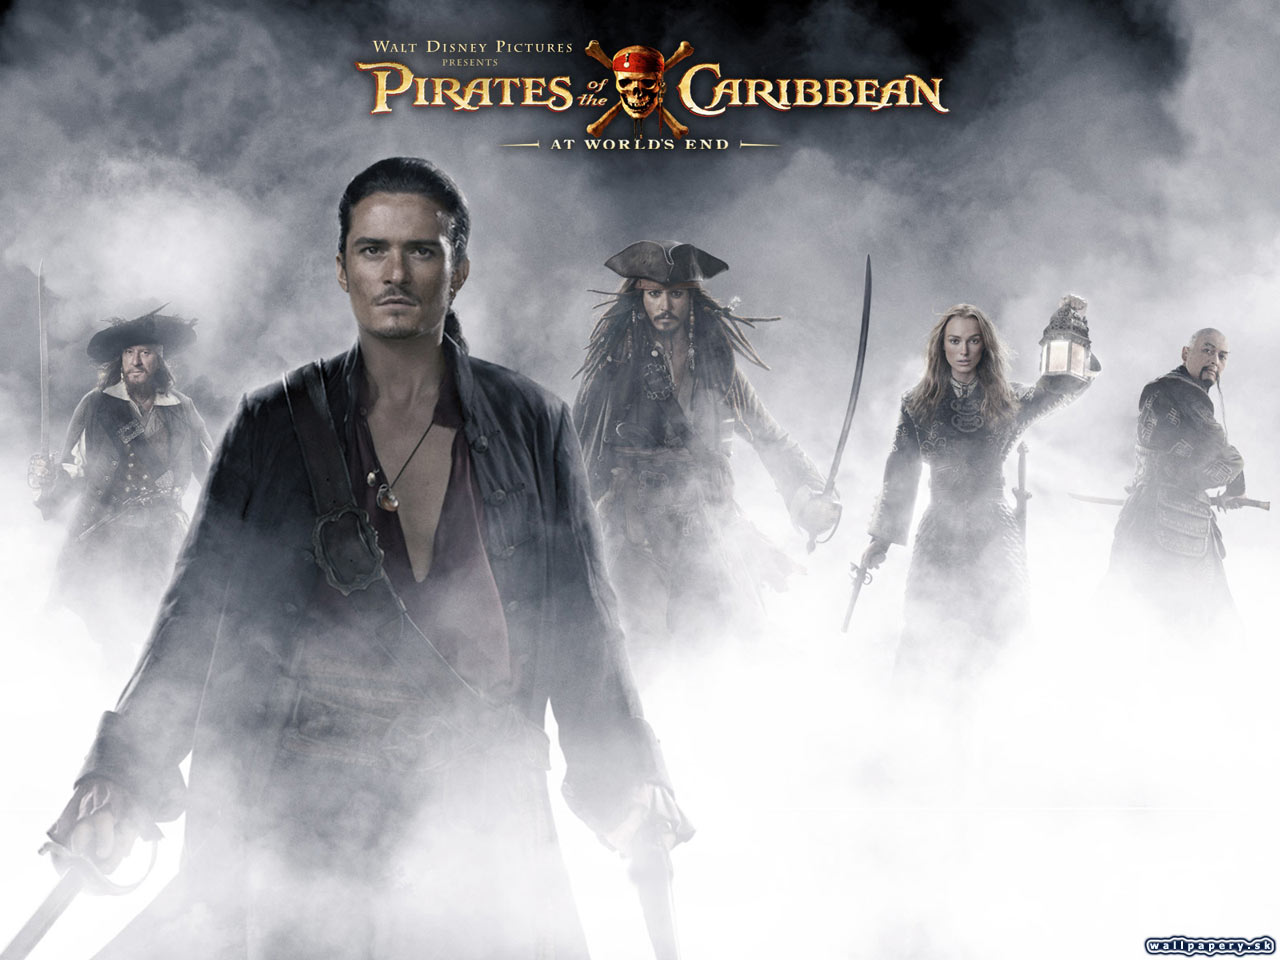 Pirates of the Caribbean: At World's End - wallpaper 2